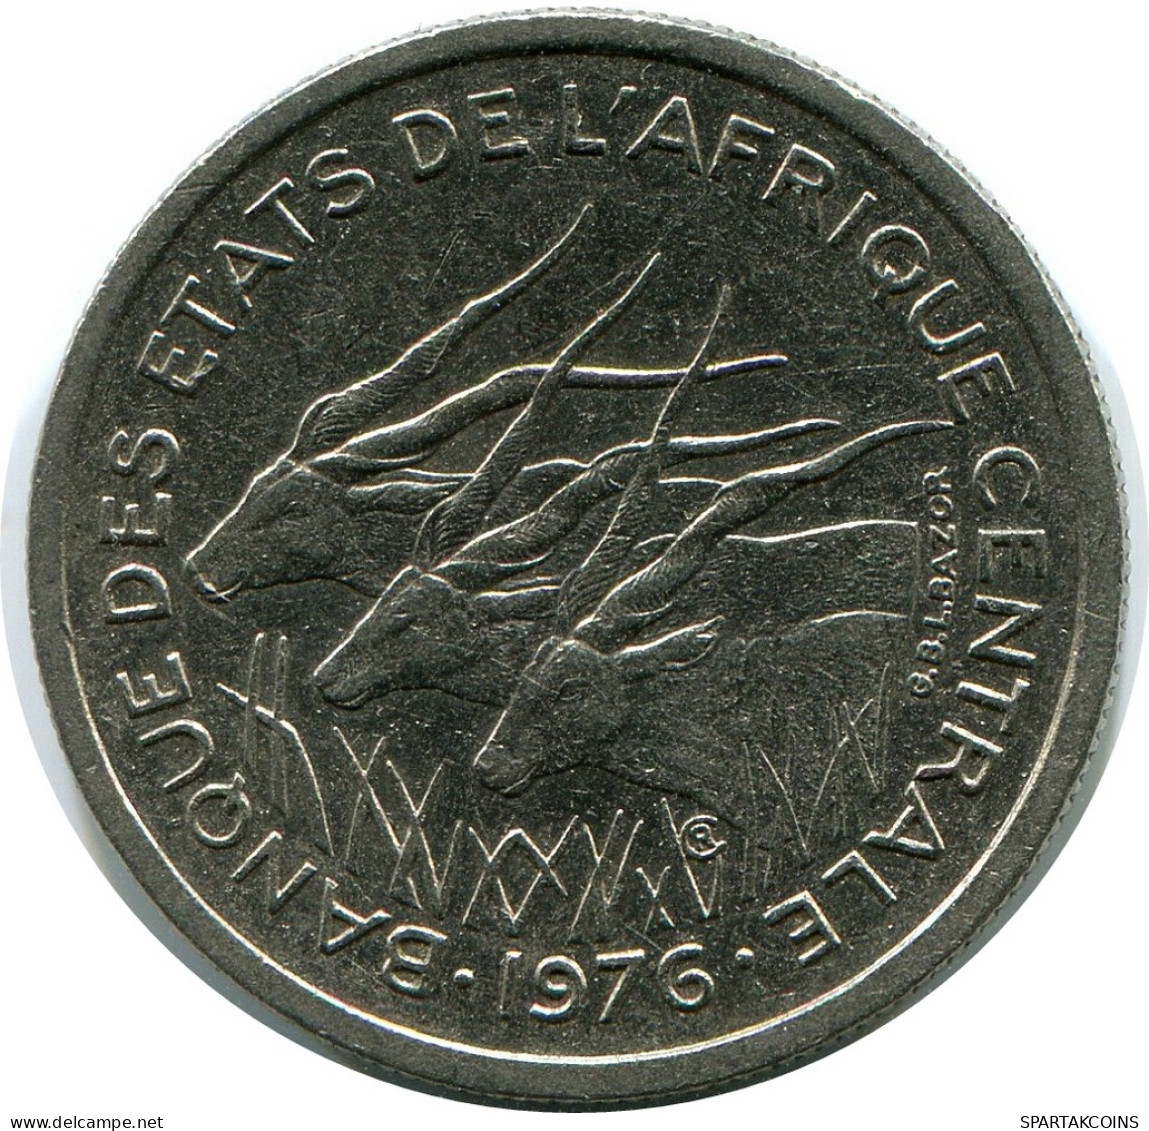 50 FRANCS CFA 1976 CENTRAL AFRICAN STATES (BEAC) Coin #AP867.U - Centraal-Afrikaanse Republiek